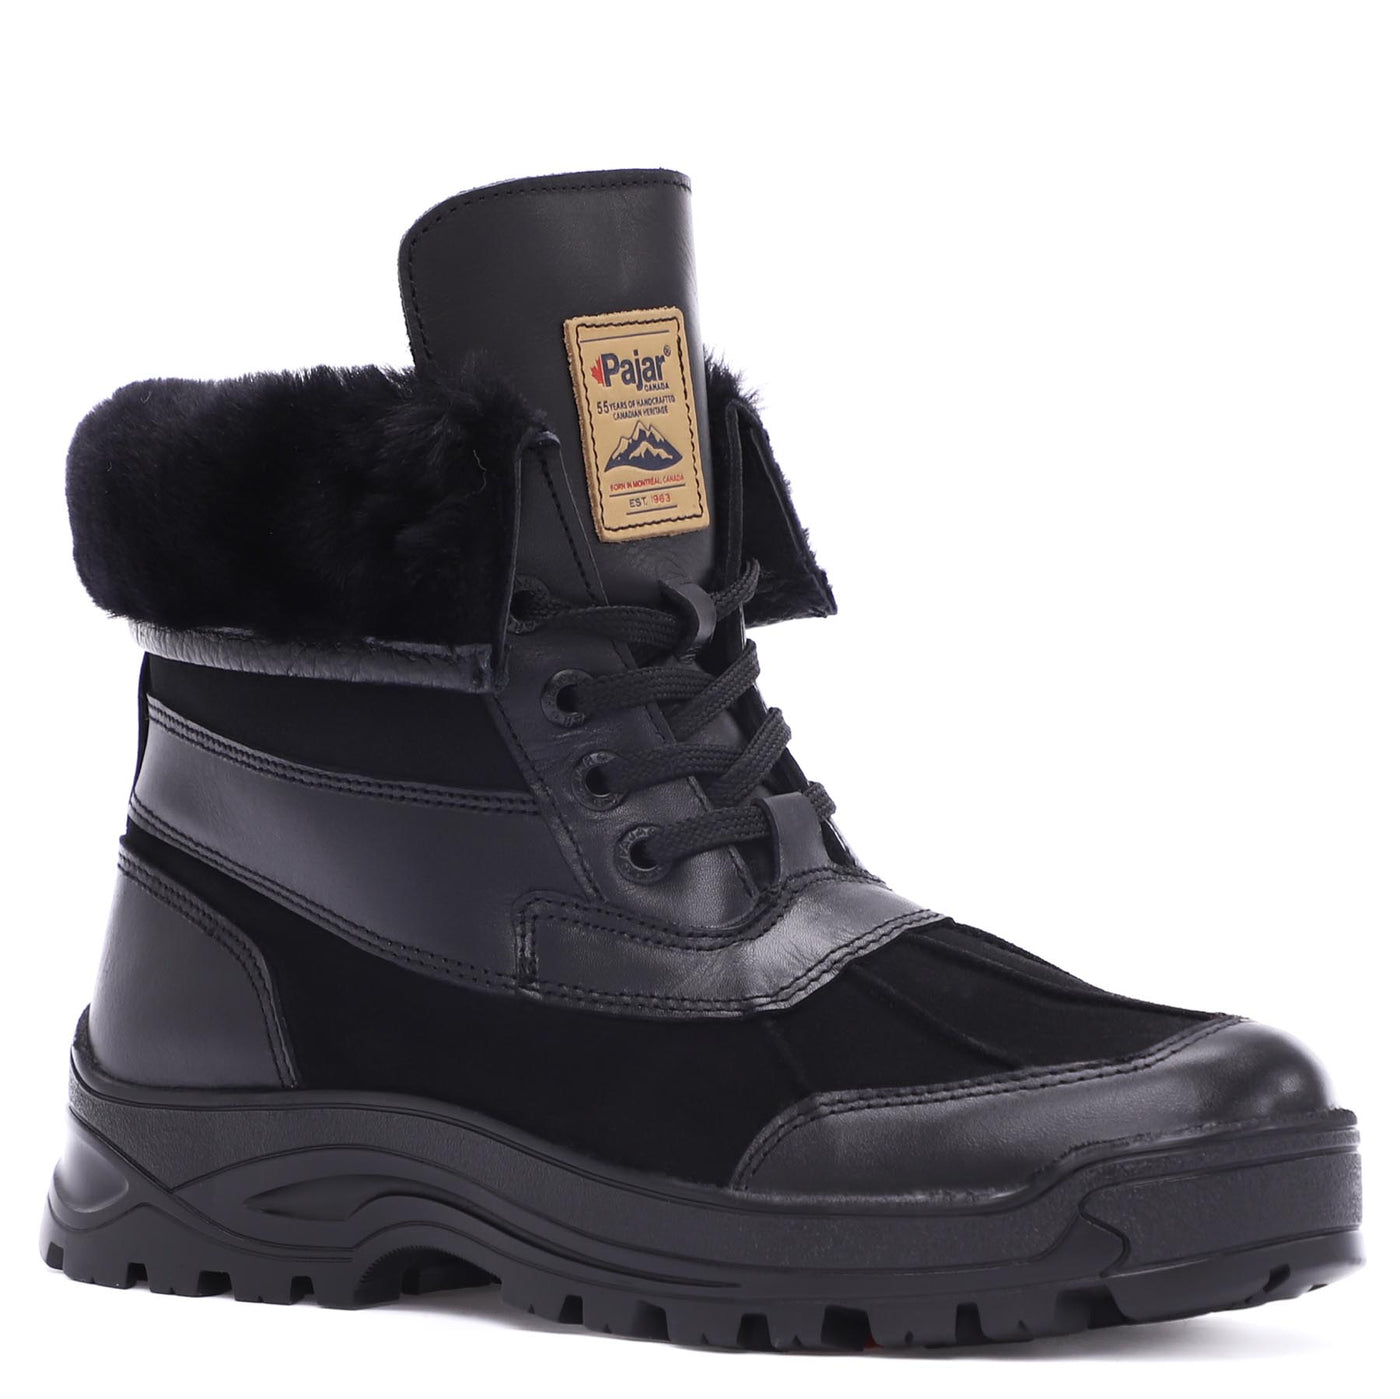 Clermont G Men's Heritage Boot w/ Ice Grippers